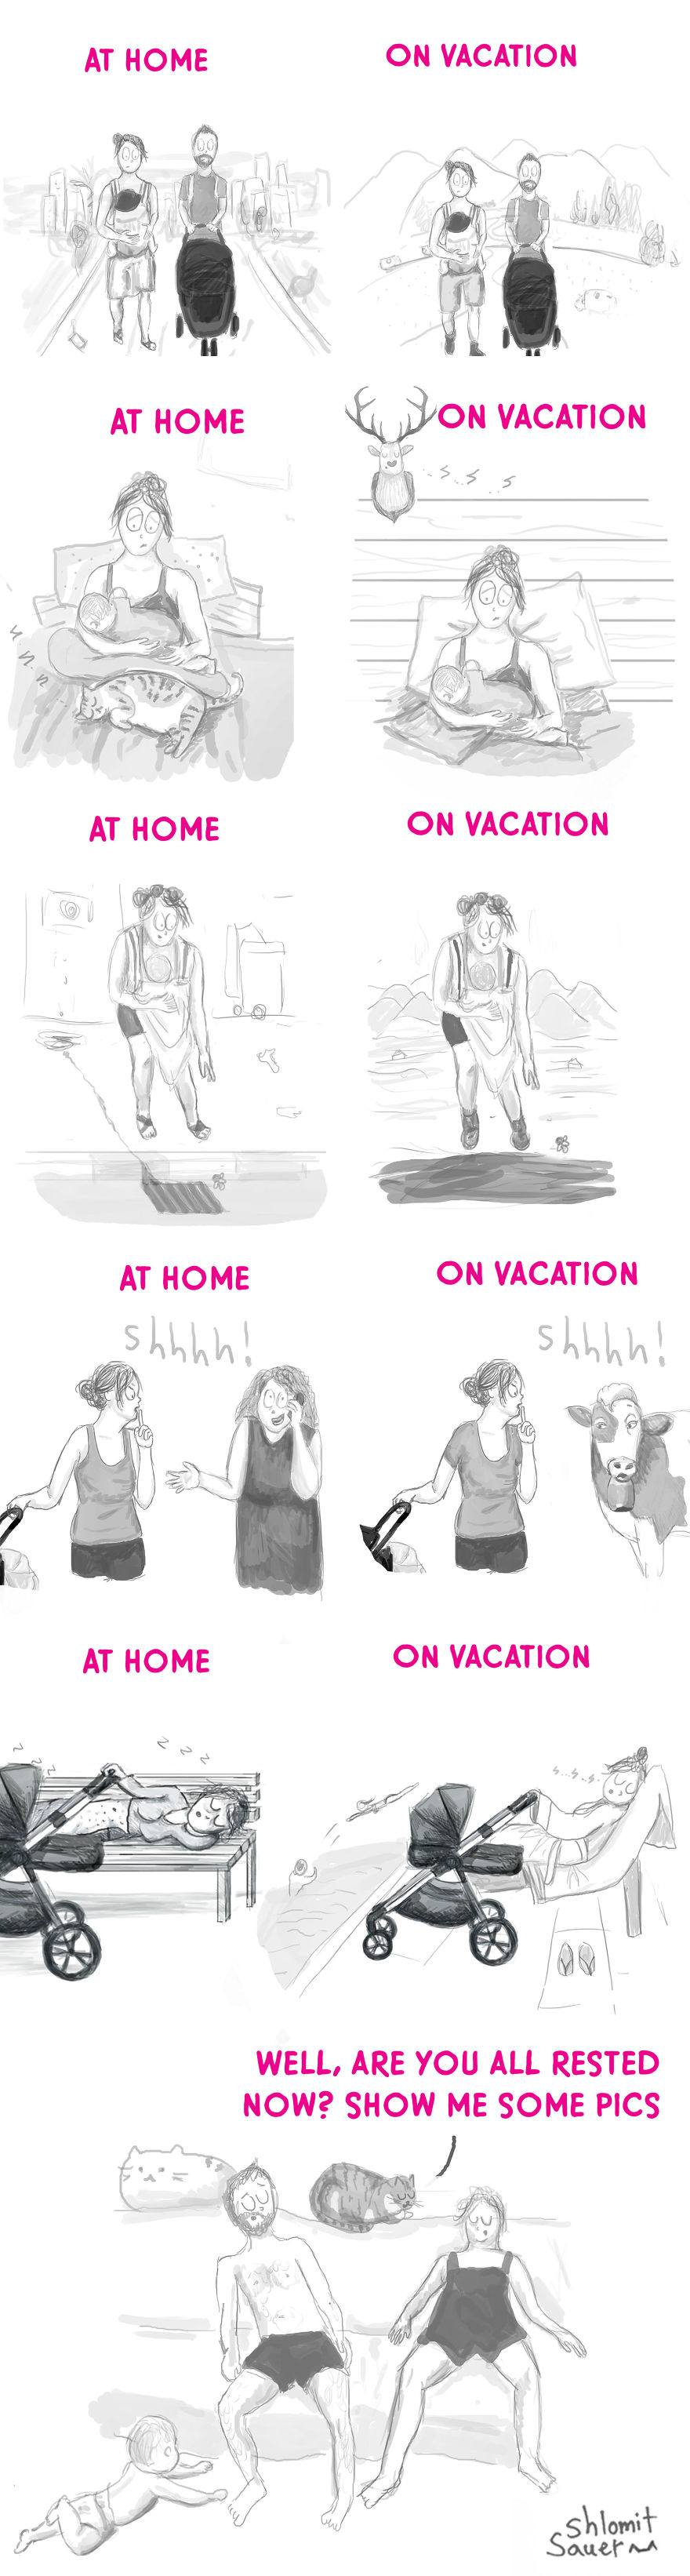 My Tired Mommy - Illustrated Experiences Of A Young Moother